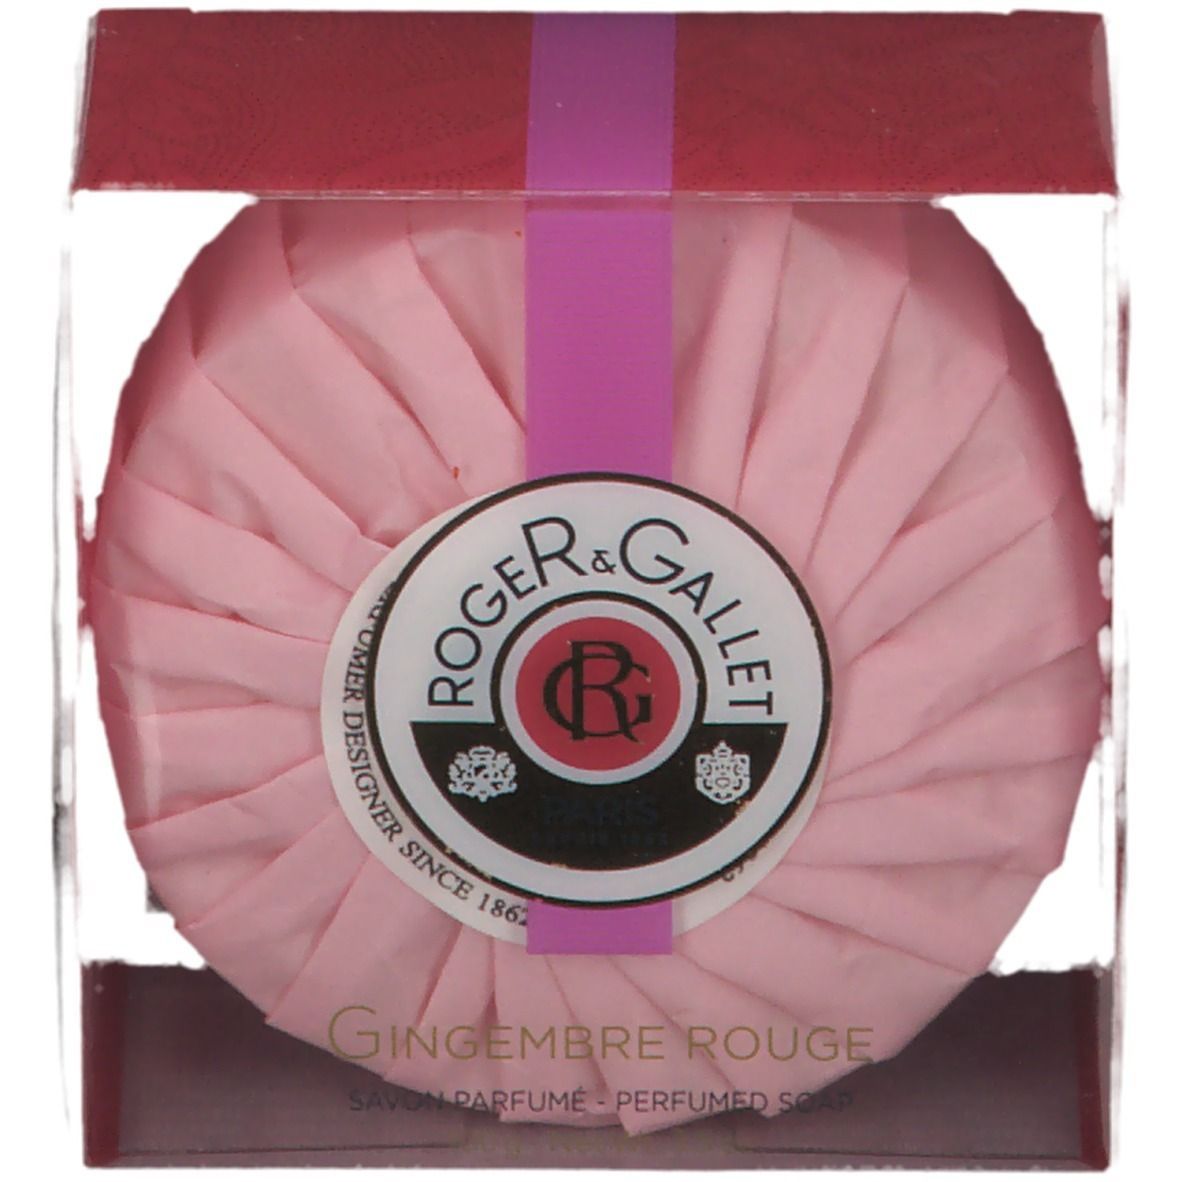 ROGER & GALLET Gingembre Rouge Seife